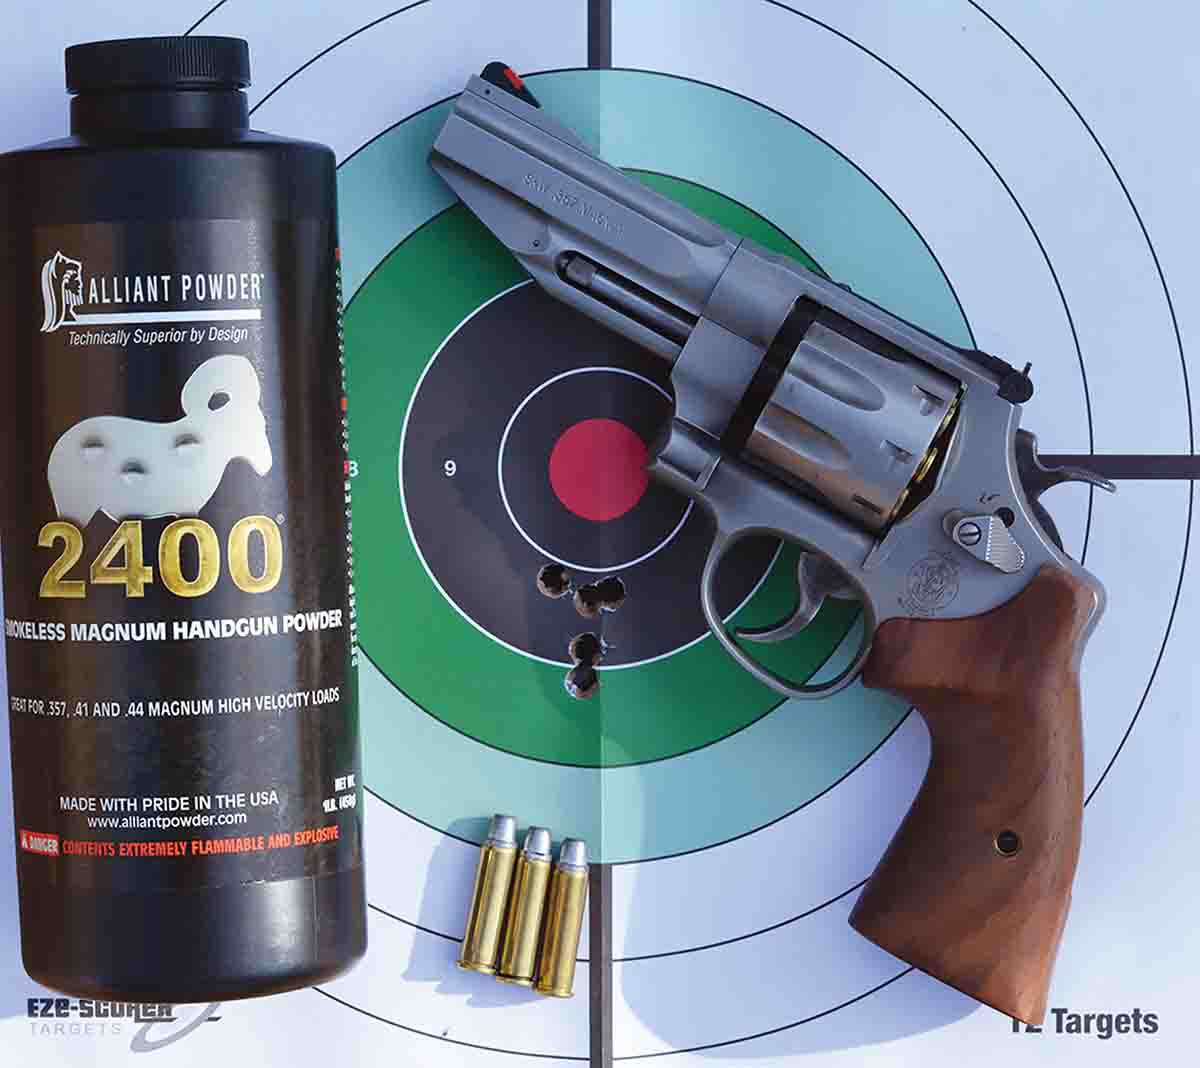 The Smith & Wesson Model 627 .357 Magnum provided good accuracy at 25 yards with loads containing both jacketed and cast bullets.